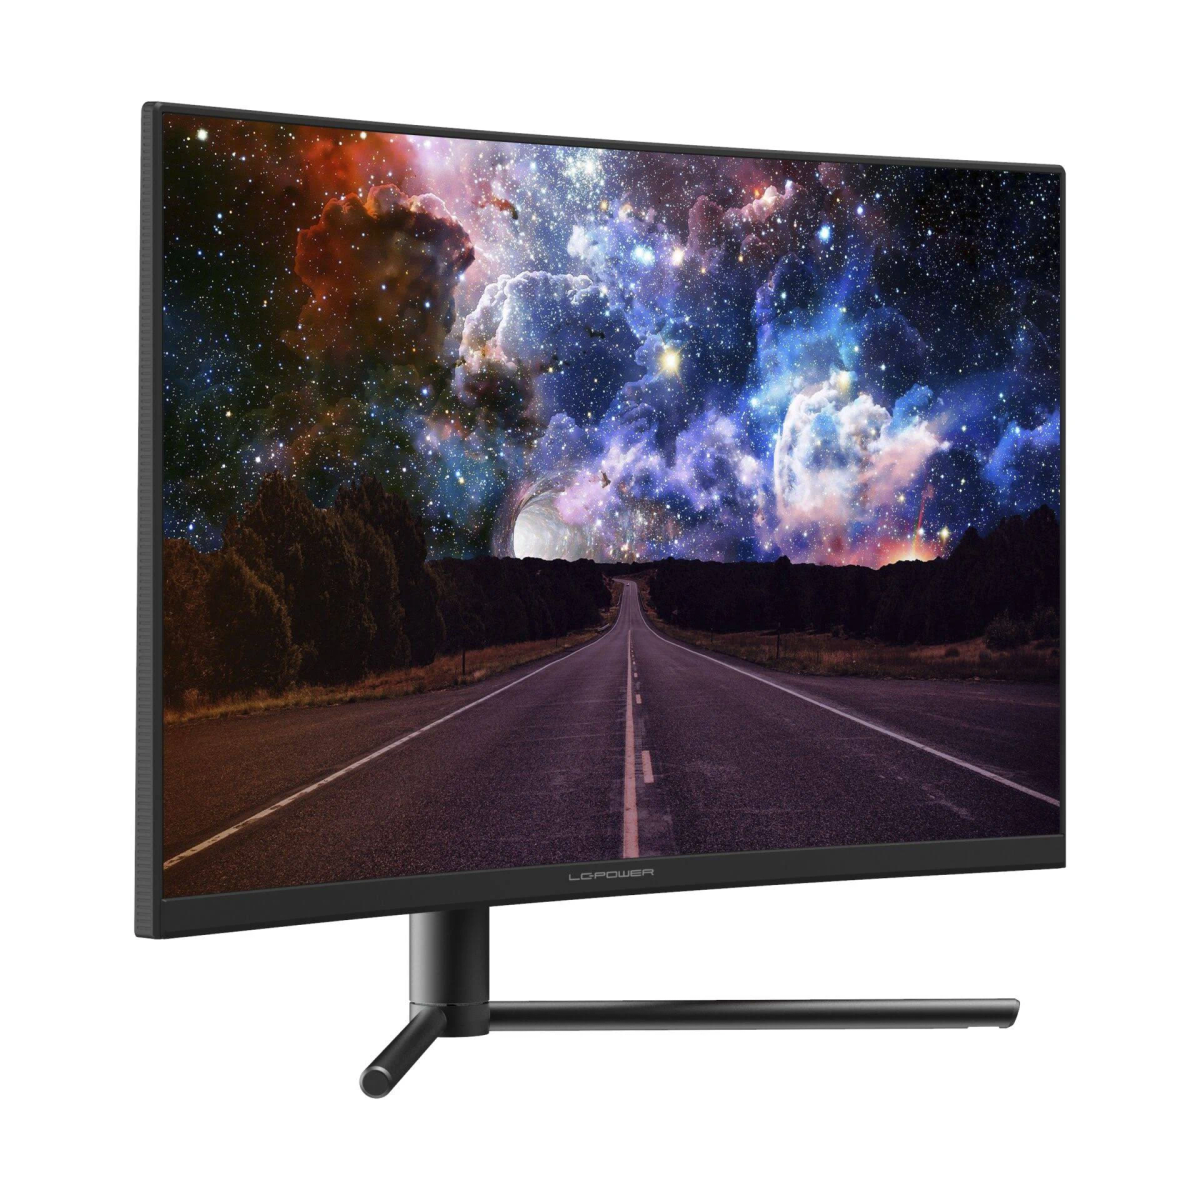 LC POWER LC-M27-FHD-240-C Hz (1 27 Monitor, ms Zoll Gaming-Monitor 240 nativ) , Hz Full-HD 240 Reaktionszeit 